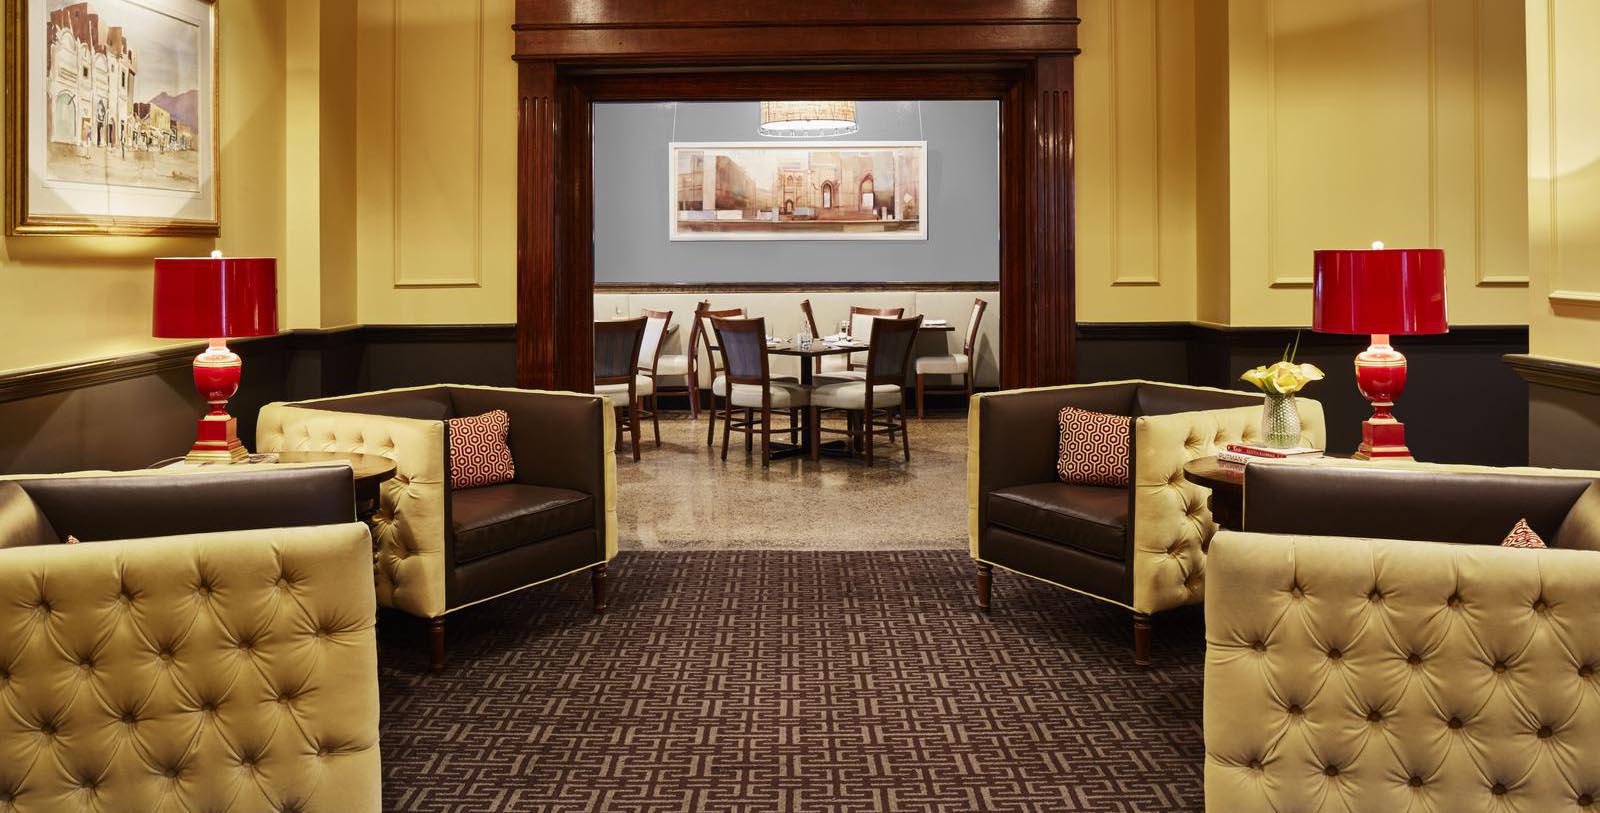 Image of Seating Area The Dunhill Hotel, 1929, Member of Historic Hotels of America, in Charlotte, North Carolina, Discover